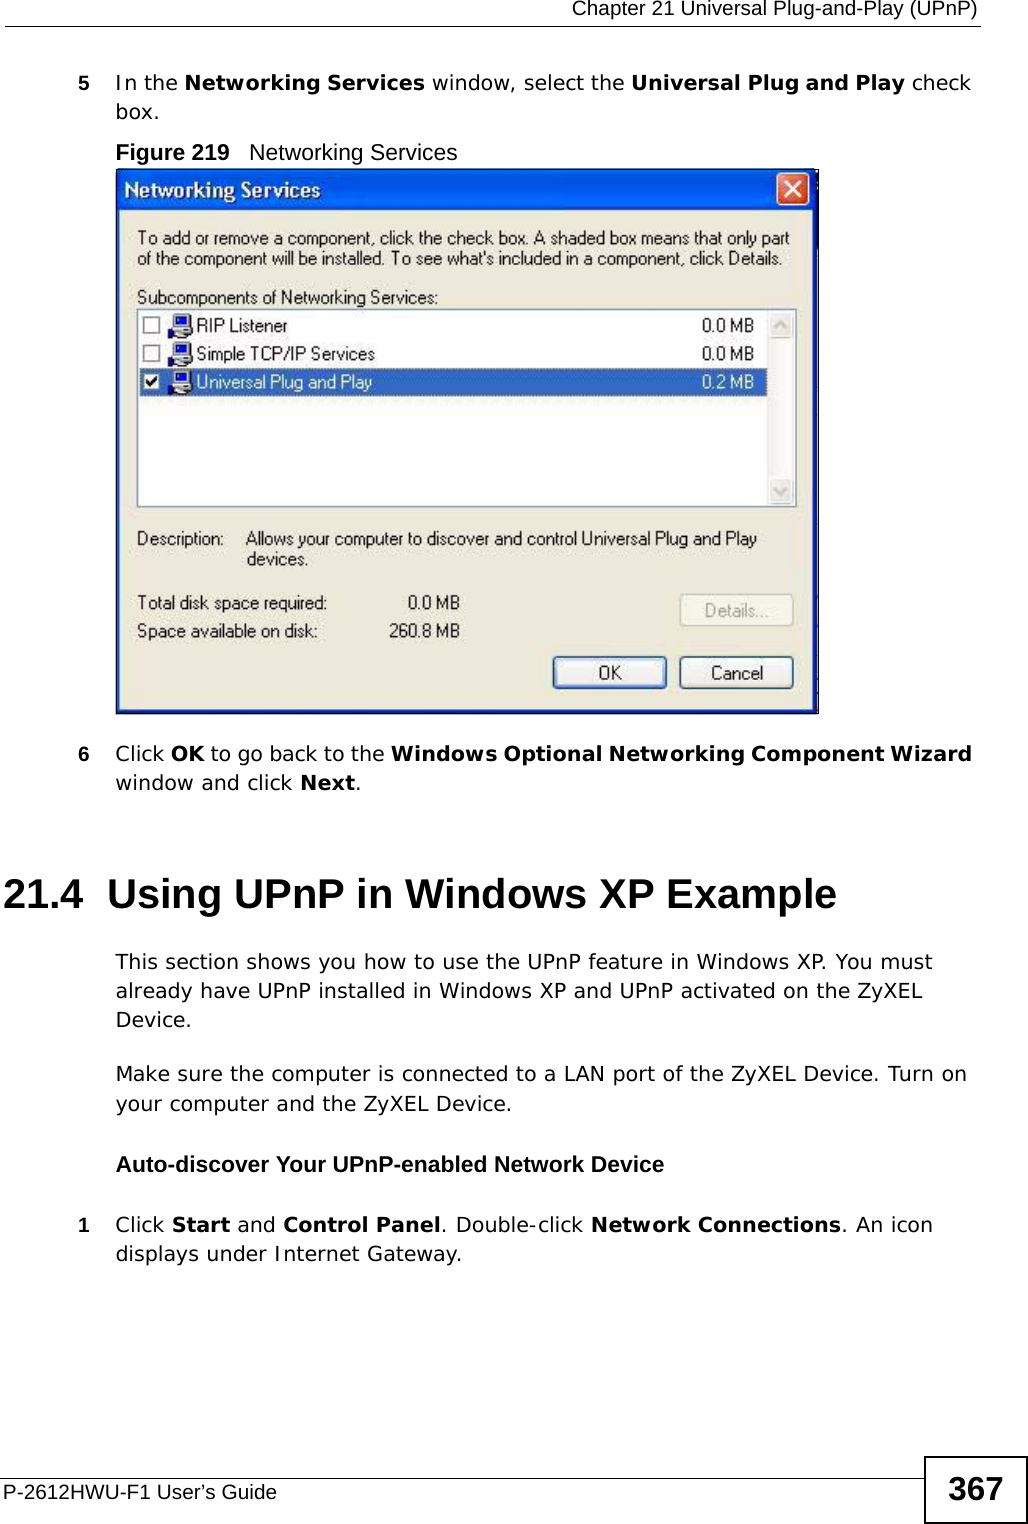  Chapter 21 Universal Plug-and-Play (UPnP)P-2612HWU-F1 User’s Guide 3675In the Networking Services window, select the Universal Plug and Play check box. Figure 219   Networking Services6Click OK to go back to the Windows Optional Networking Component Wizard window and click Next. 21.4  Using UPnP in Windows XP ExampleThis section shows you how to use the UPnP feature in Windows XP. You must already have UPnP installed in Windows XP and UPnP activated on the ZyXEL Device.Make sure the computer is connected to a LAN port of the ZyXEL Device. Turn on your computer and the ZyXEL Device. Auto-discover Your UPnP-enabled Network Device1Click Start and Control Panel. Double-click Network Connections. An icon displays under Internet Gateway.